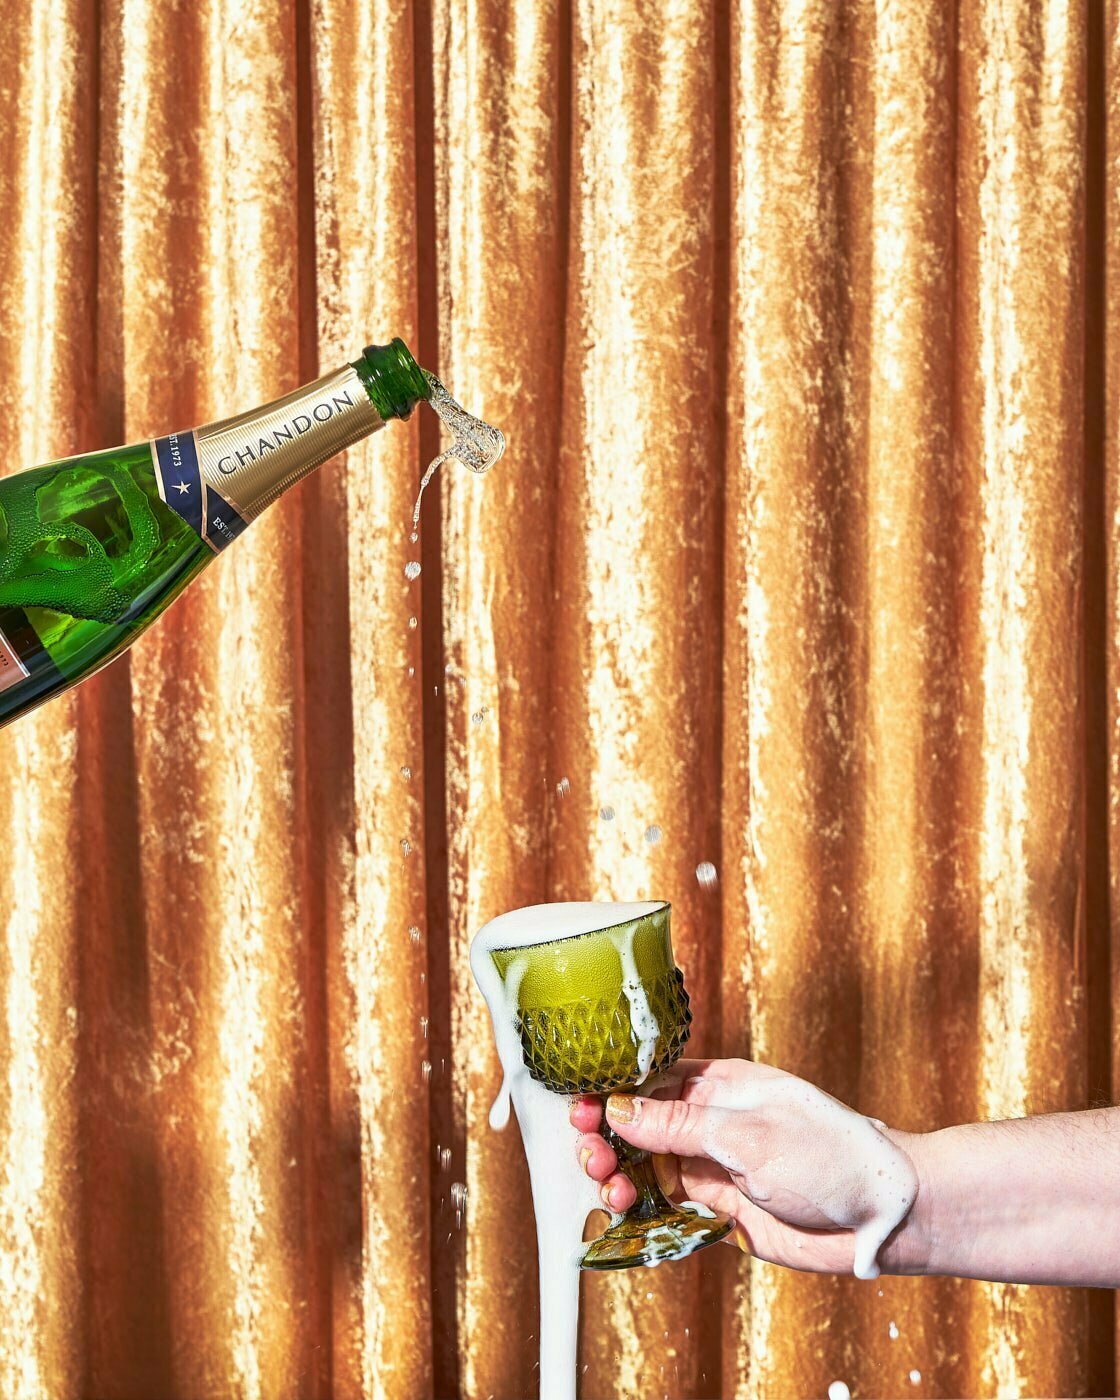 A bottle of Chandon champagne being poured into a green goblet that is over flowing with champagne.